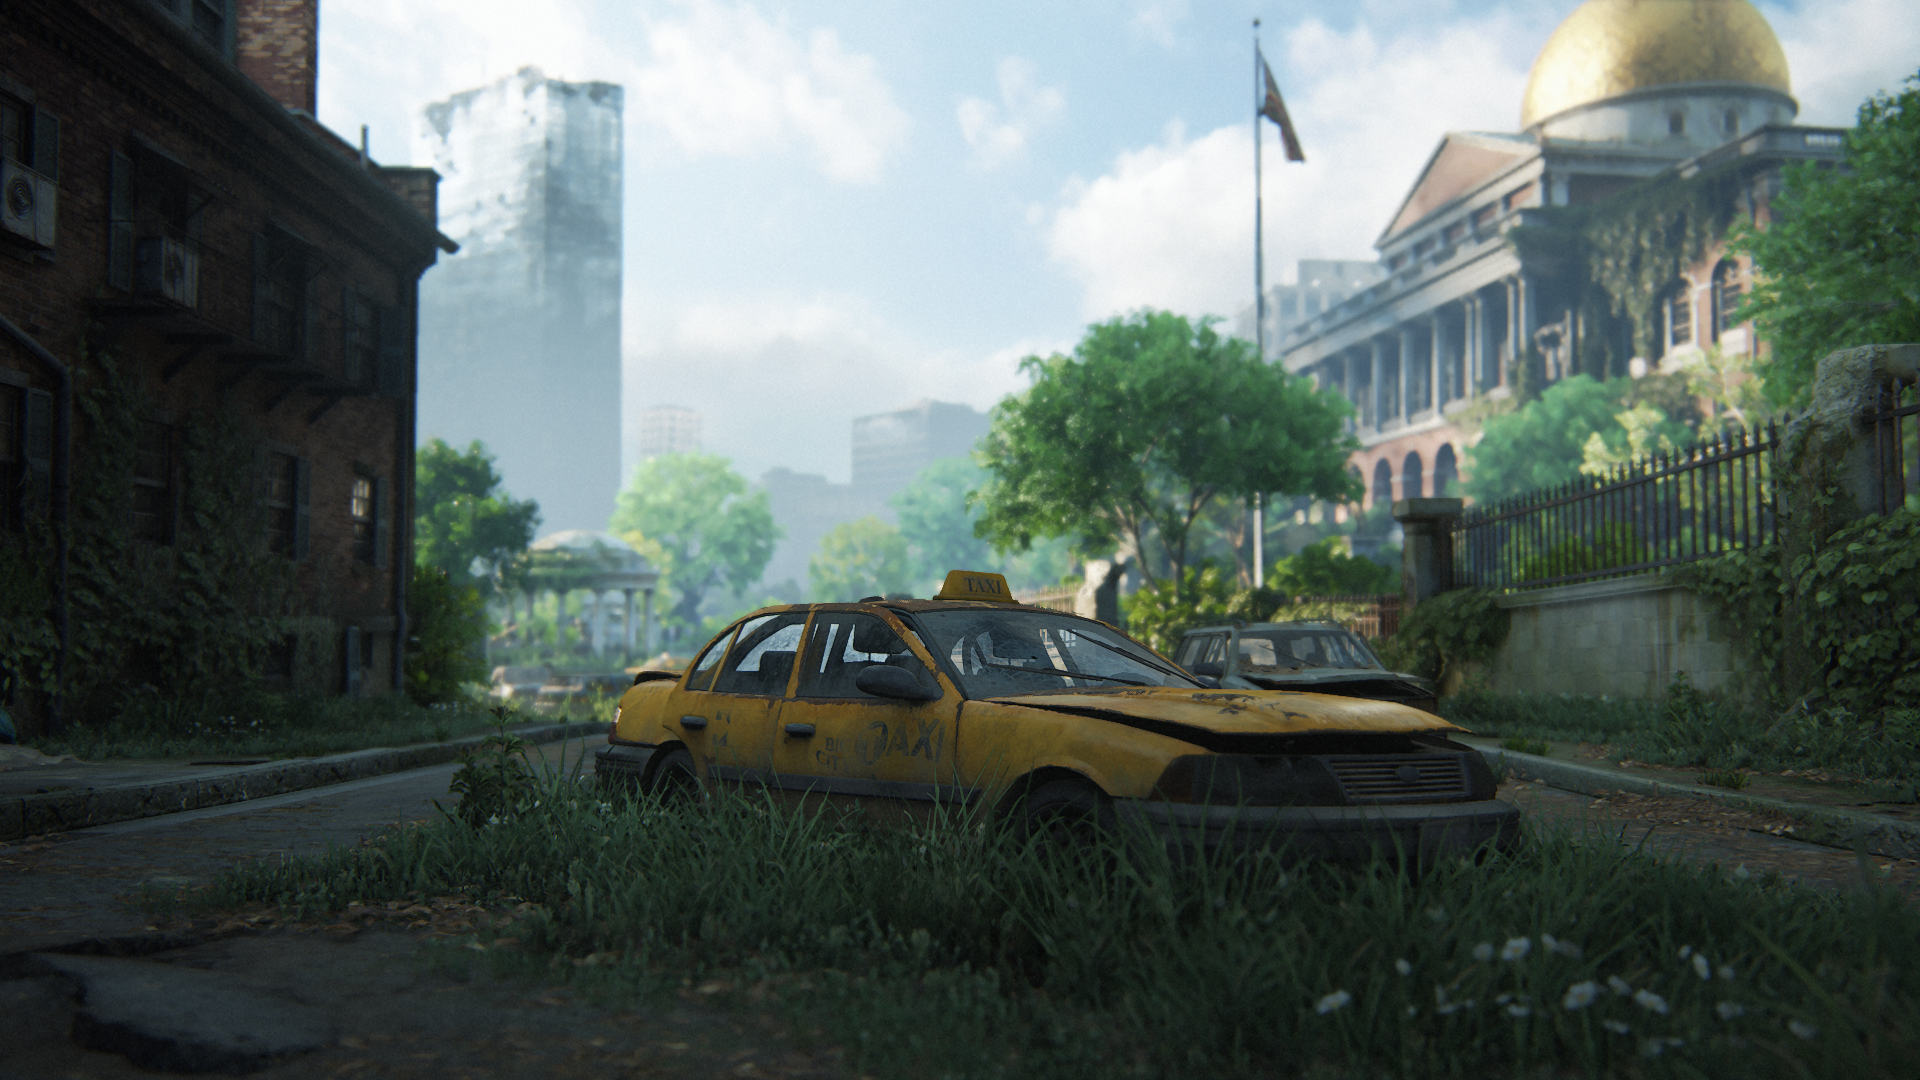 General 1920x1080 The Last of Us video games PlayStation taxi car building clouds sky trees grass flowers CGI